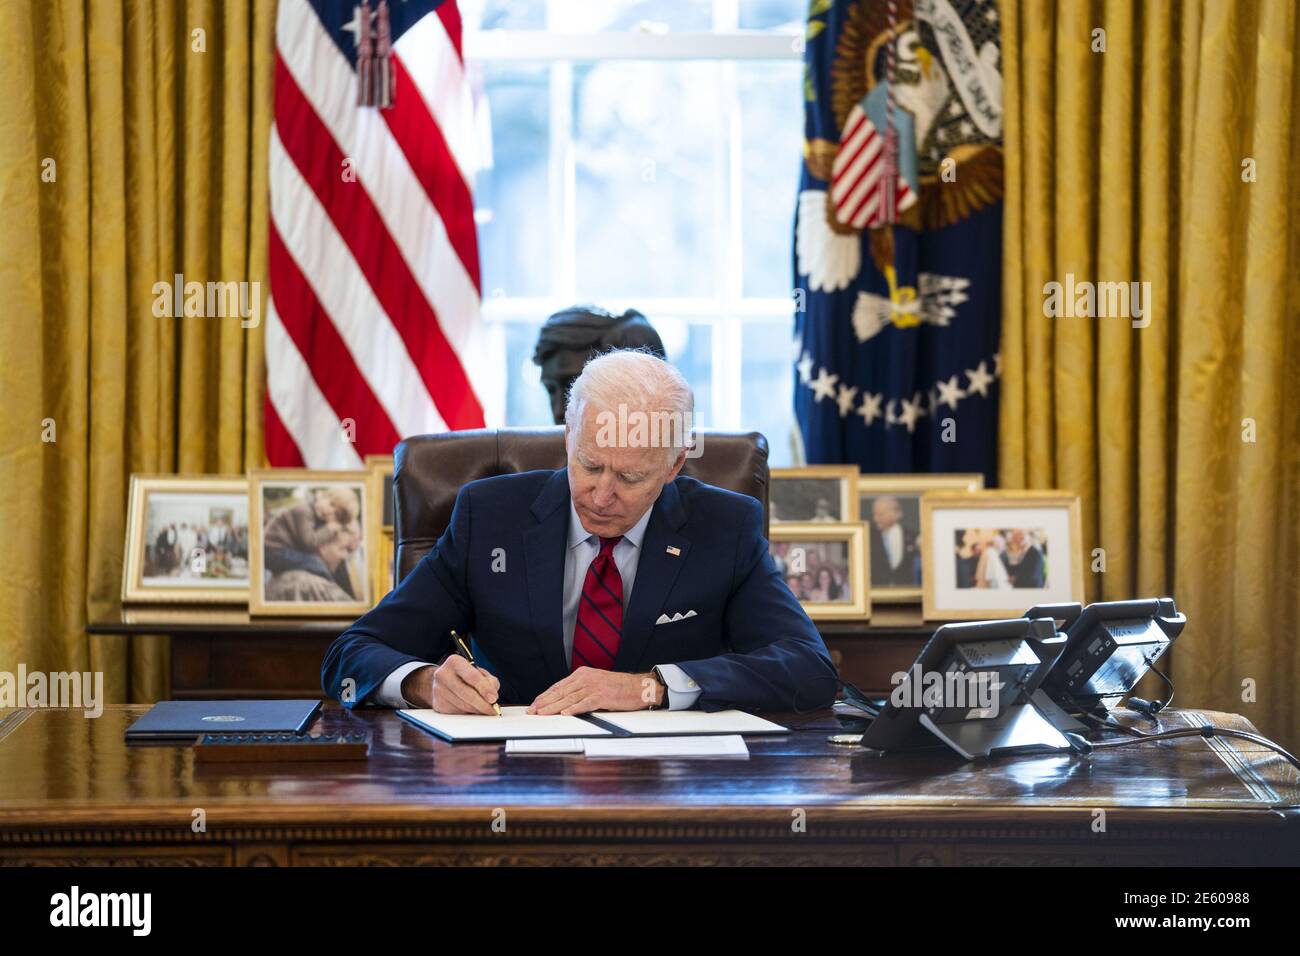 Washington, United States. 28th Jan, 2021. President Joe Biden signs executive actions strengthening Americans' access to quality, affordable health care, in the Oval Office of the White House on Thursday, January 26, 2021. Vice President Kamala Harris is at left. Pool Photo by Doug Mills/UPI Credit: UPI/Alamy Live News Stock Photo